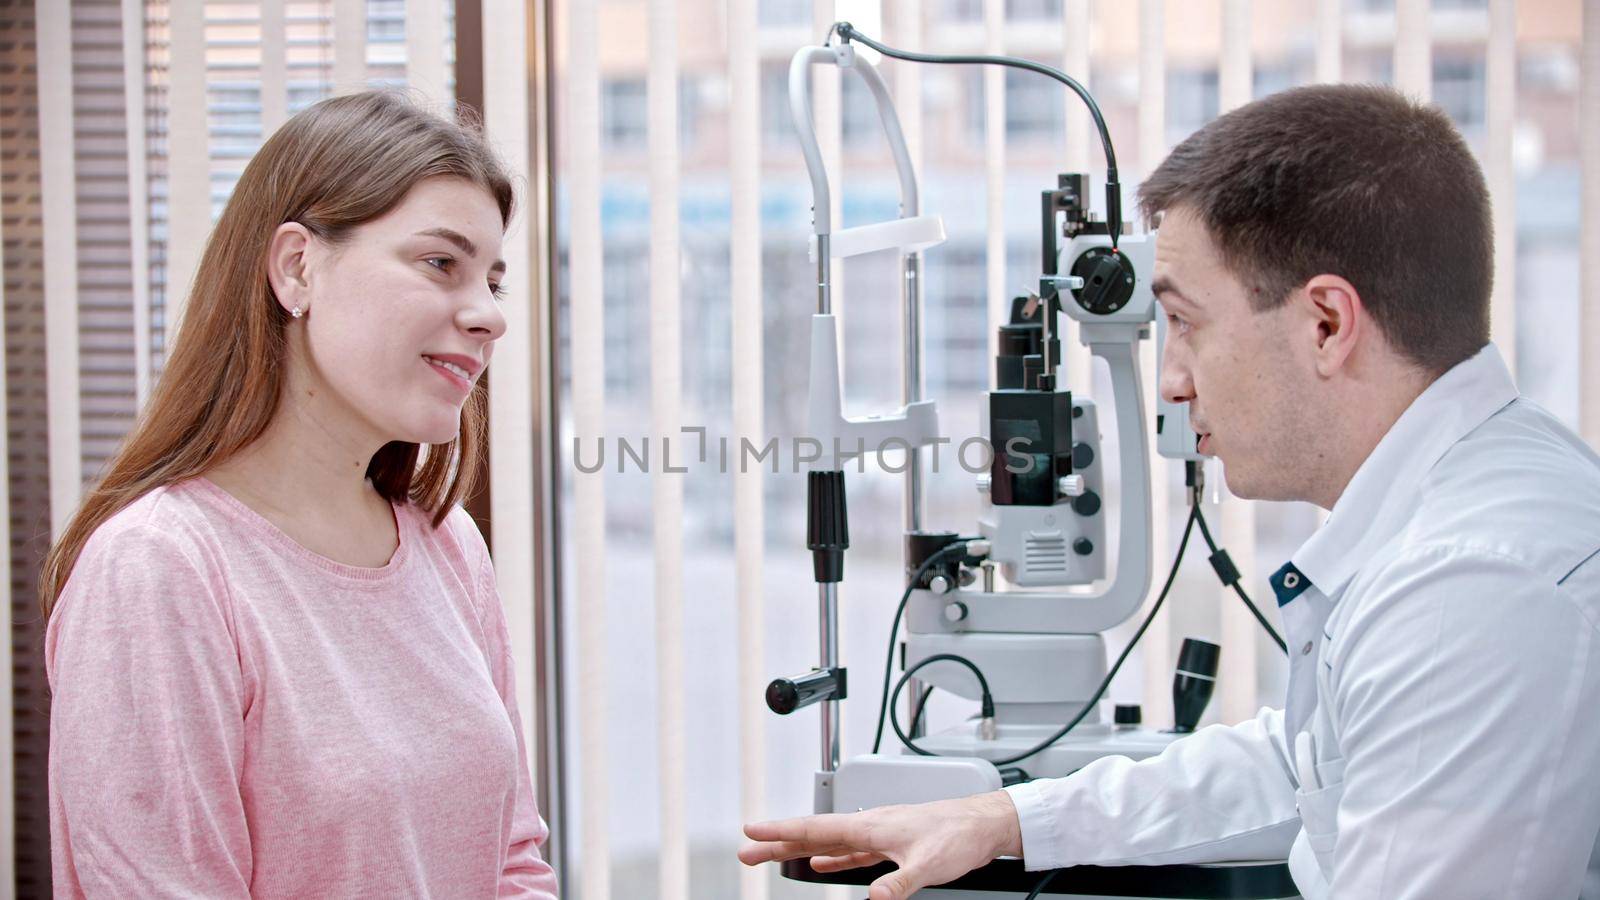 Ophthalmology treatment in the cabinet - young woman having a consultation with an optometry doctor by Studia72